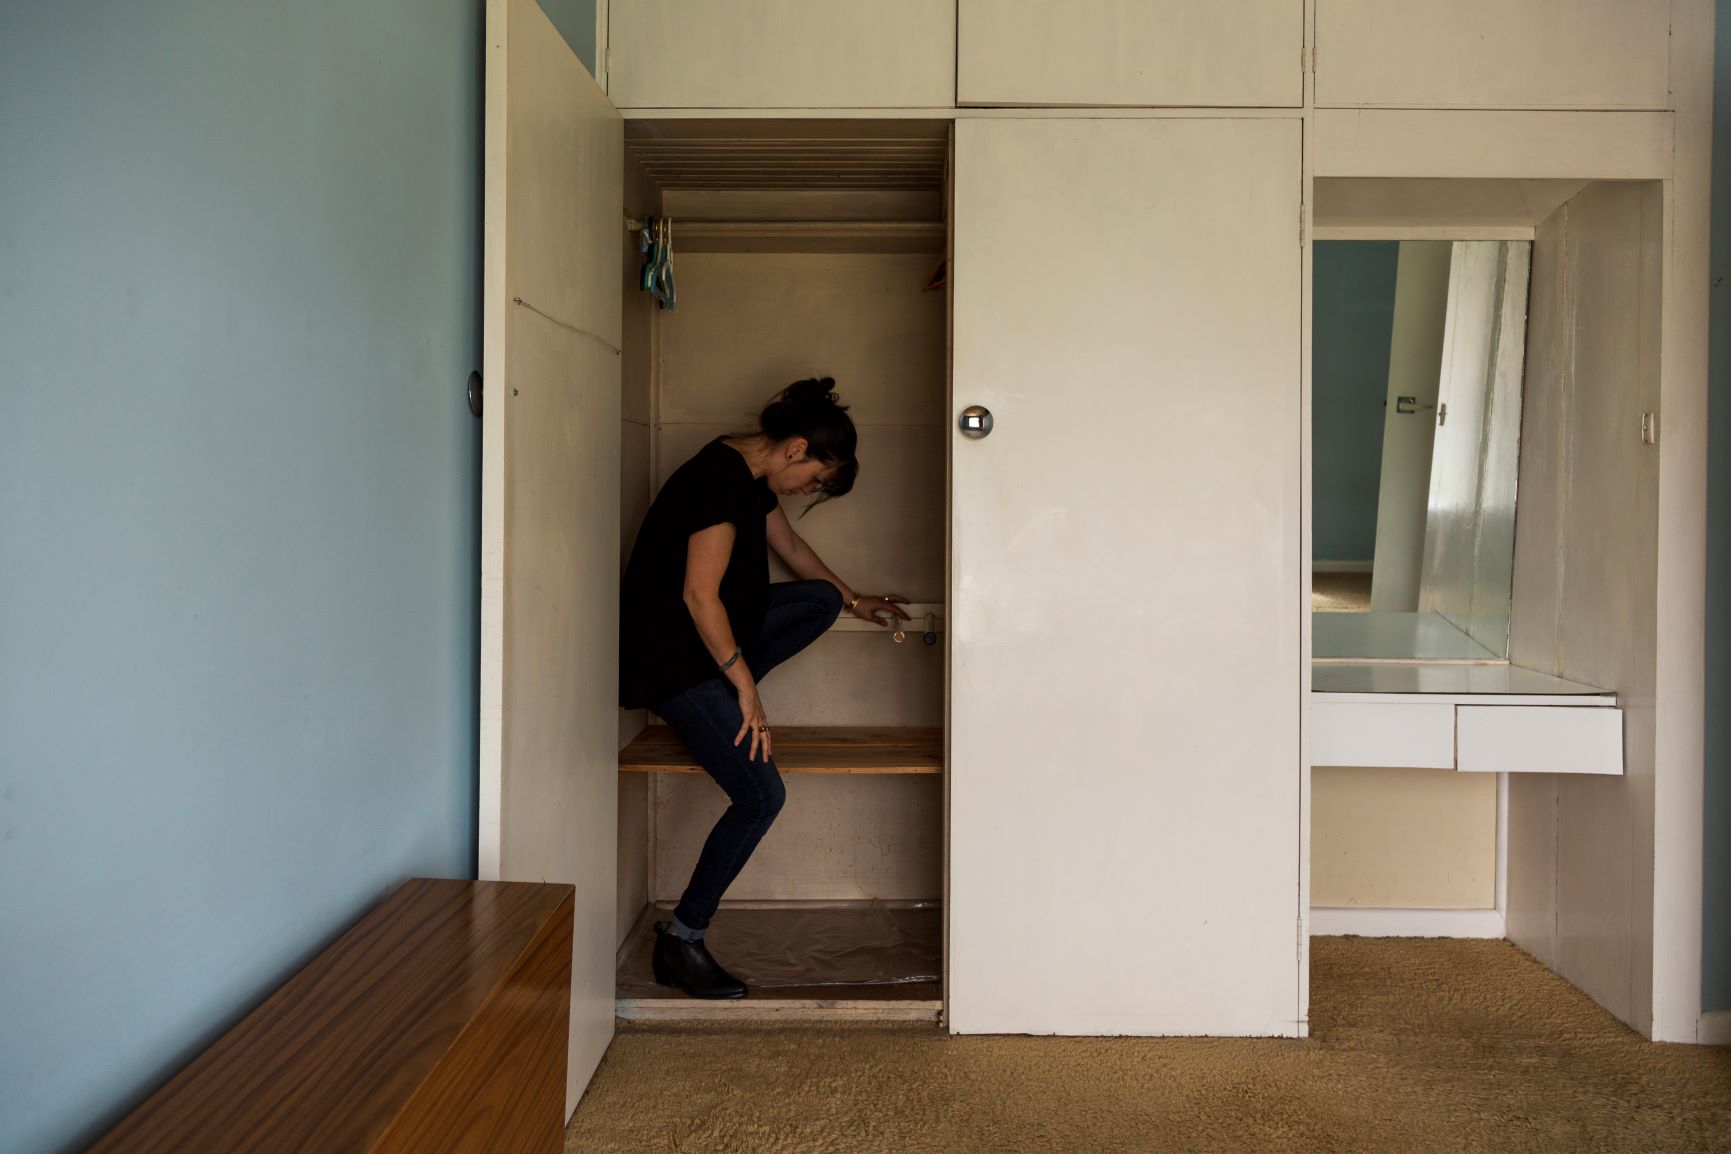 An image of a person in a closet